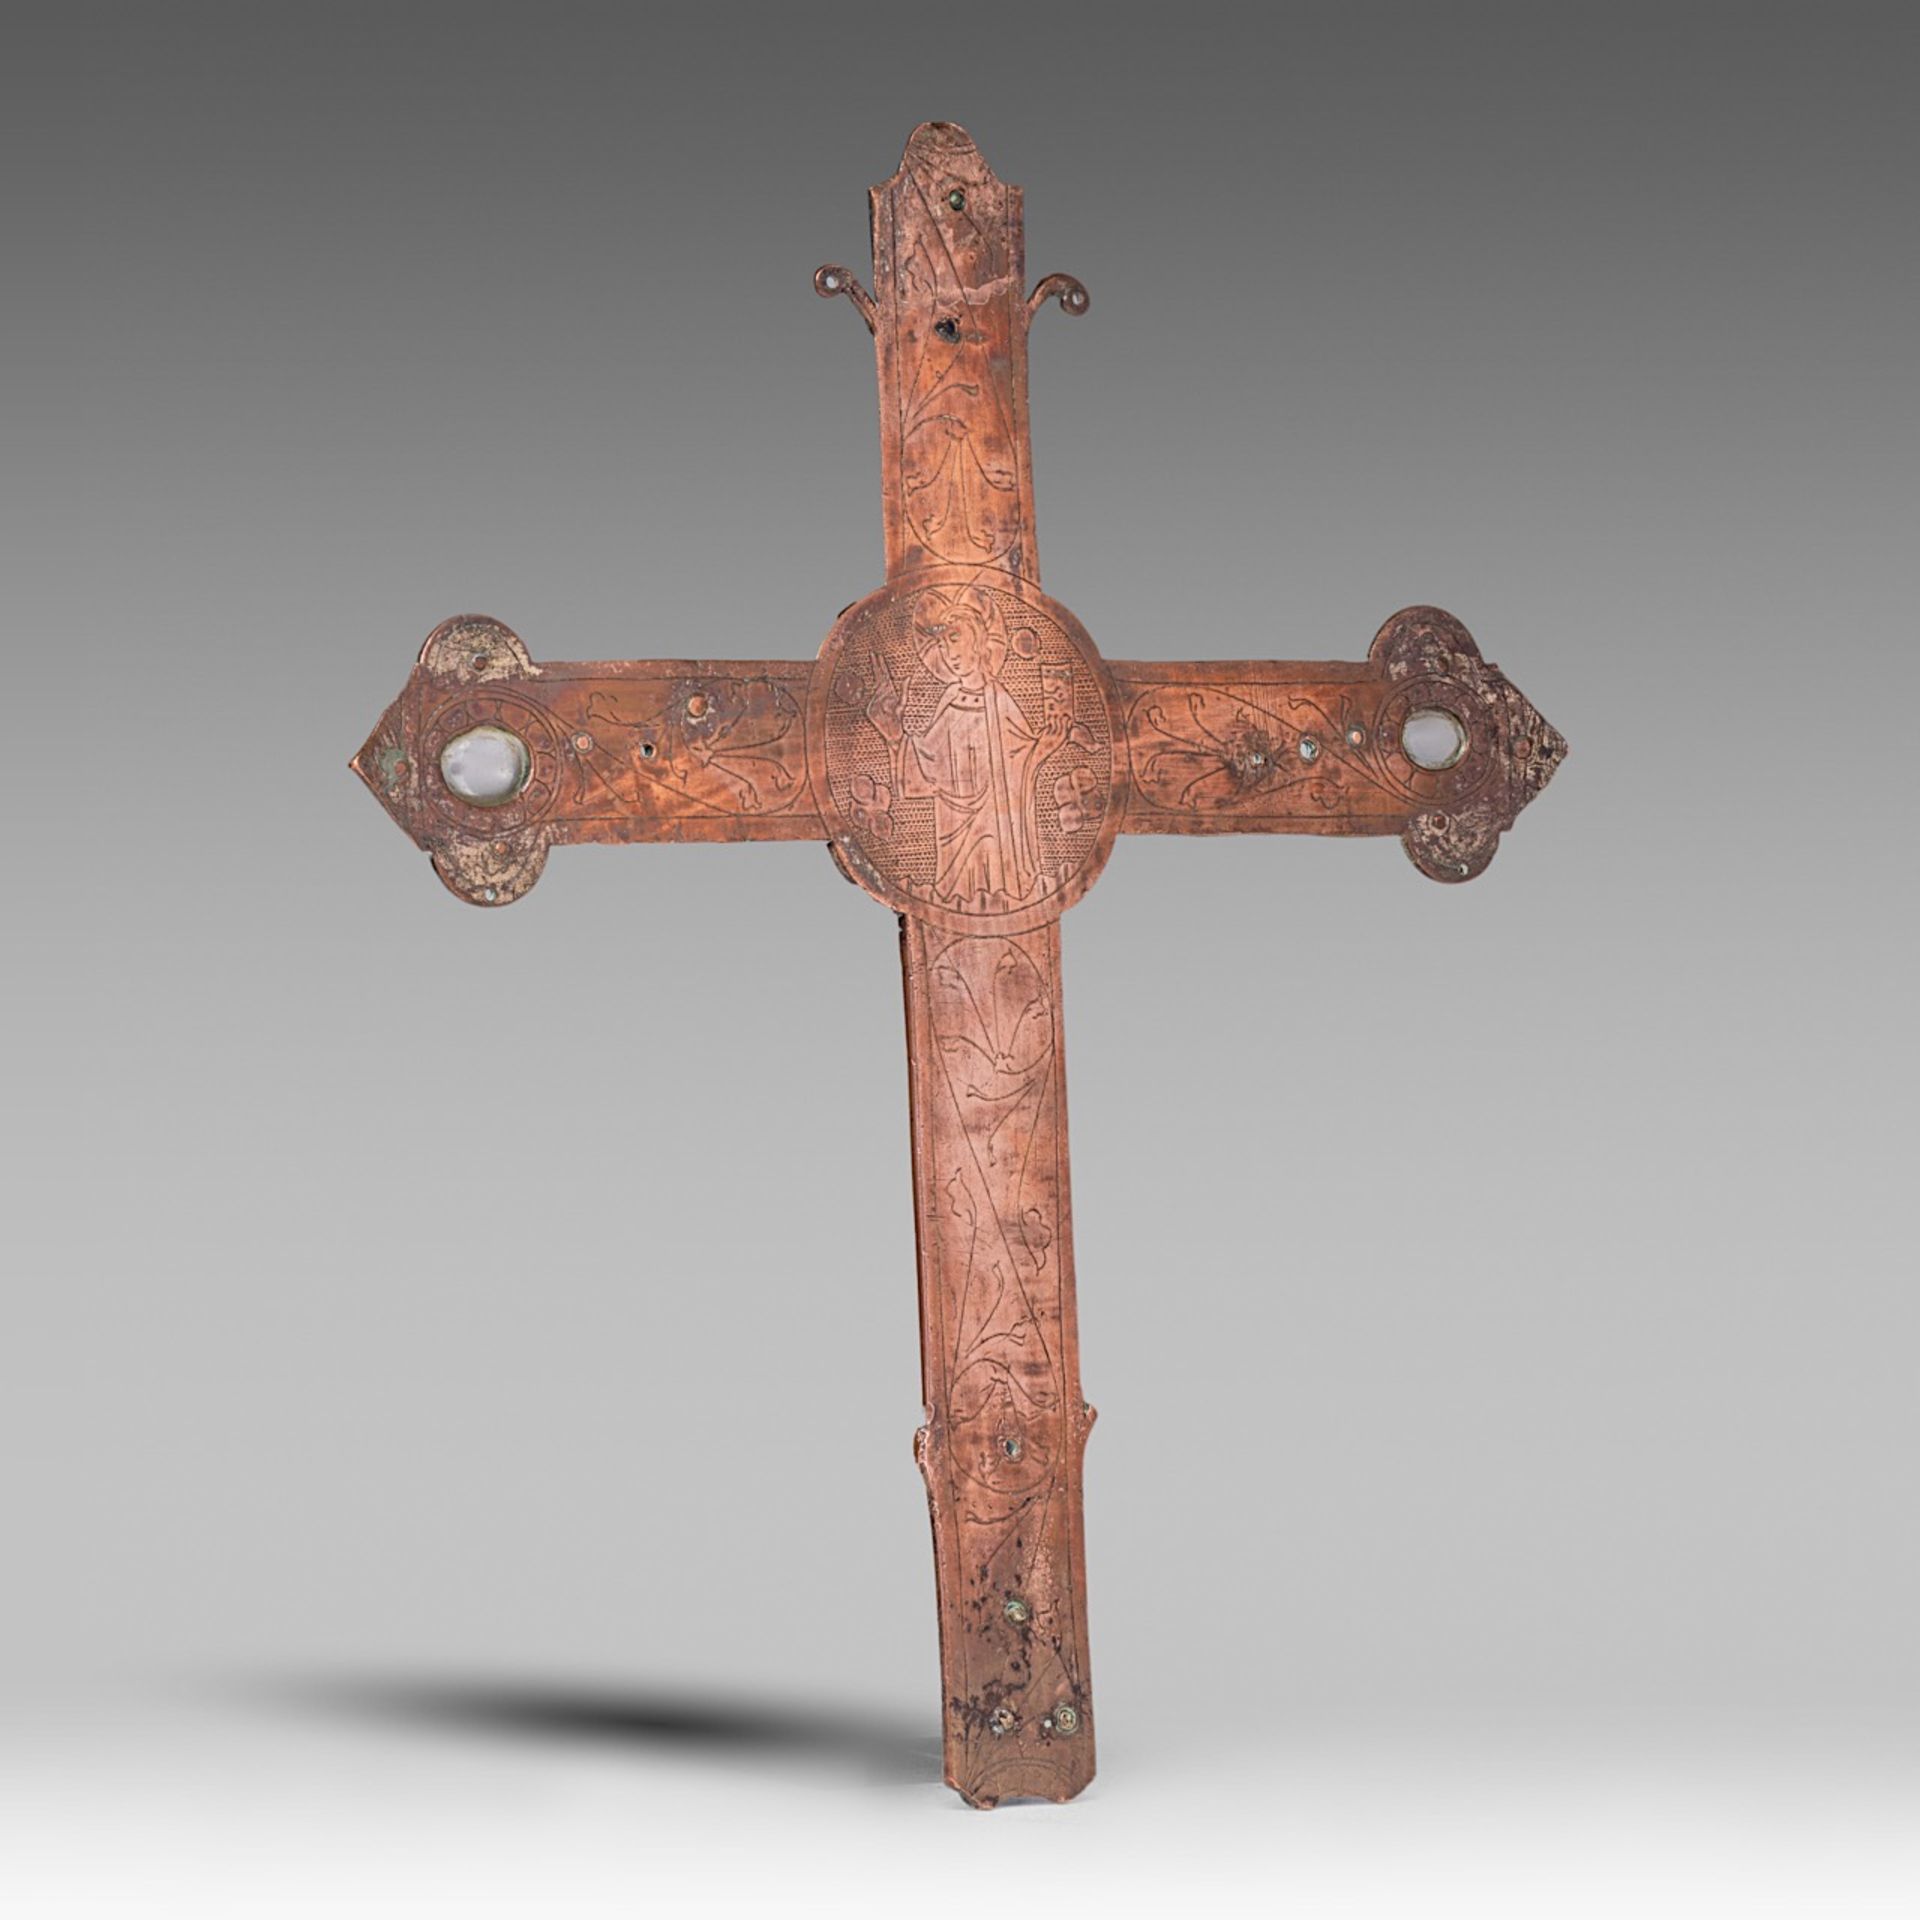 A 14thC copper engraved processional cross, with traces of gilt, H 35,5 cm - Image 2 of 5